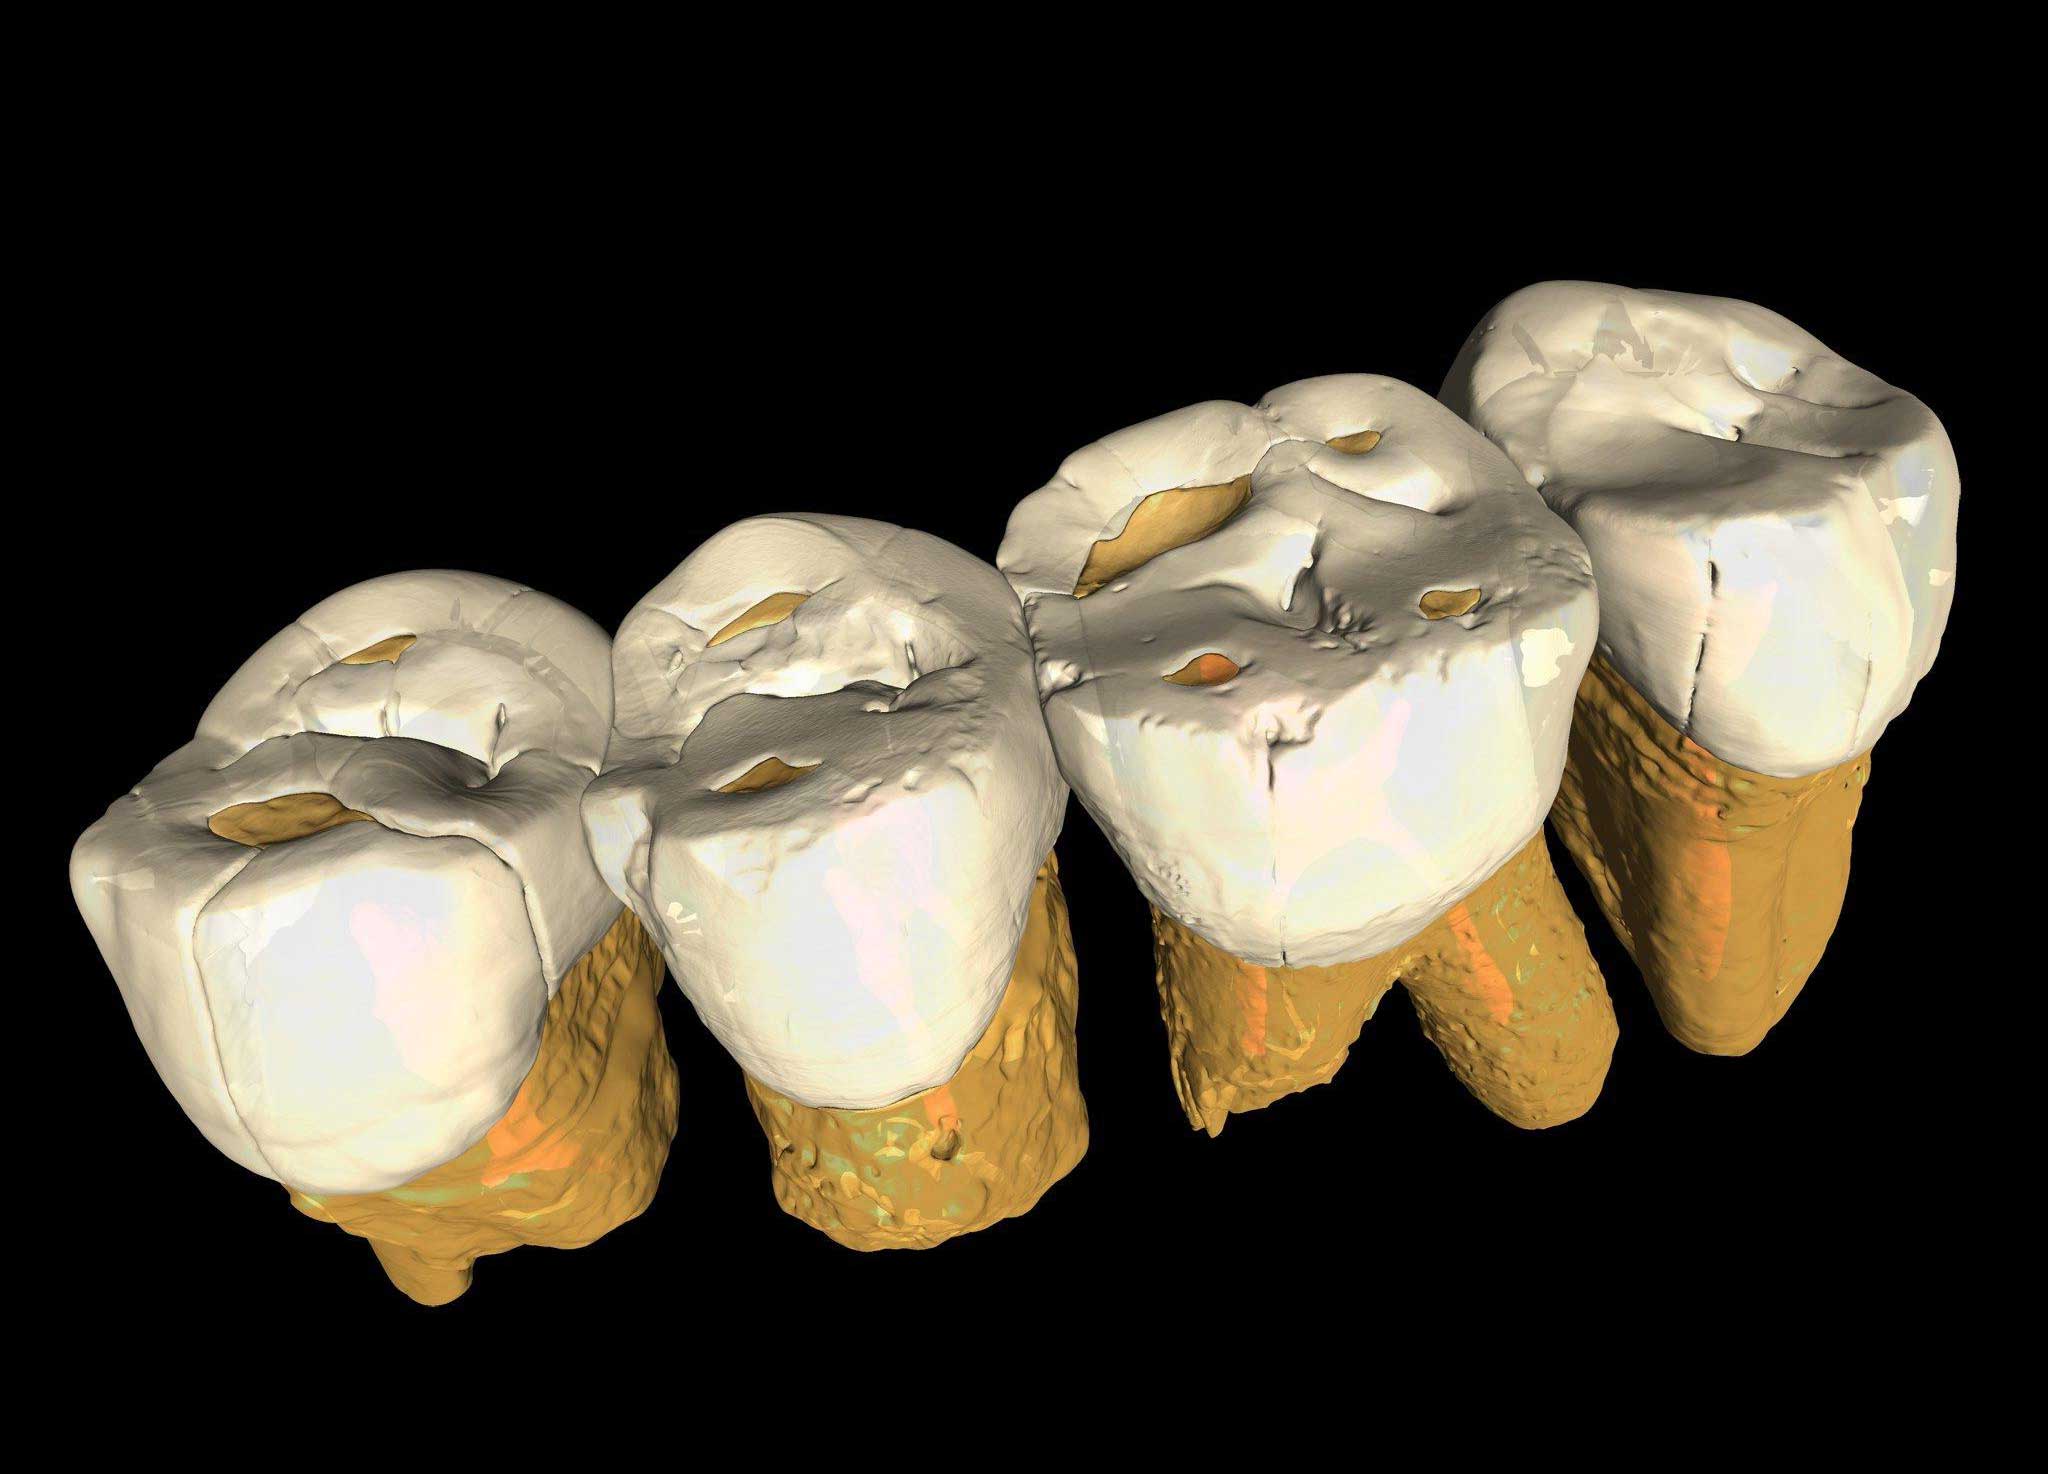 Four teeth from maxillary P3 to maxillary M2 in occlusal order shown by microCT rendering